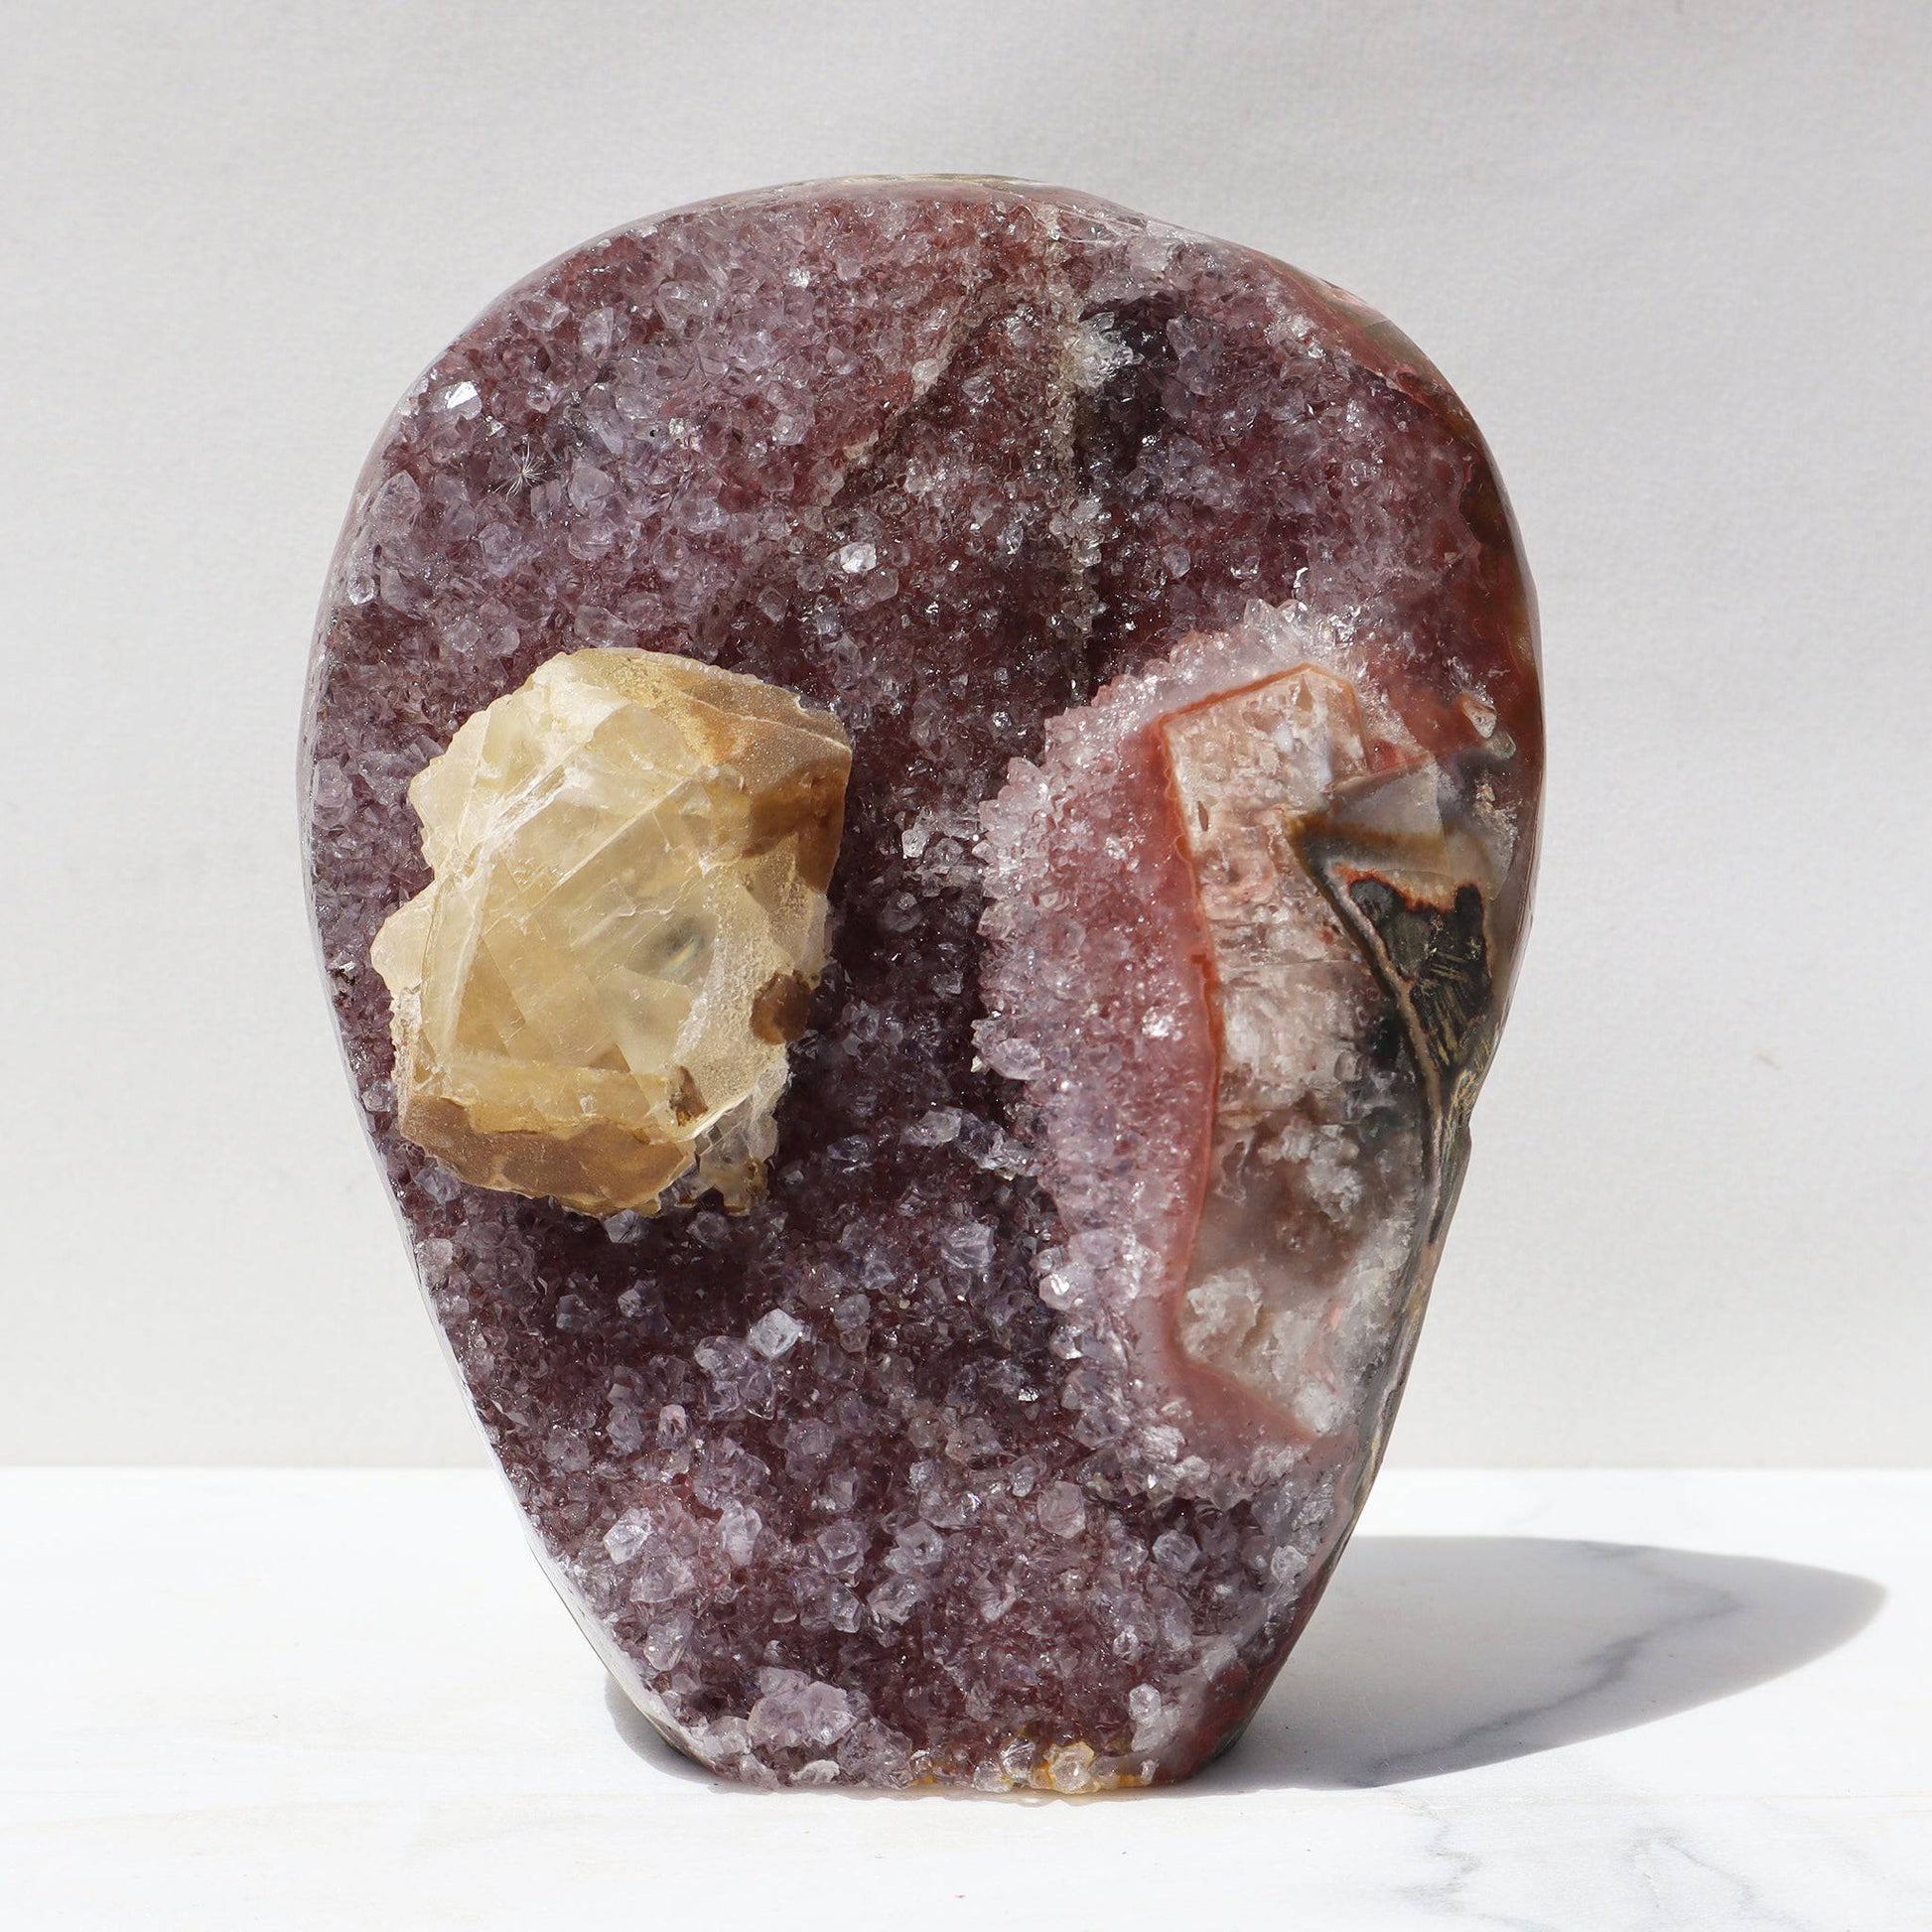 Rare, for amethyst lovers with a craving for an untraditional color. Earthy bands of red agate meet the orange-brown quartz crystals. Rich yellow calcite.